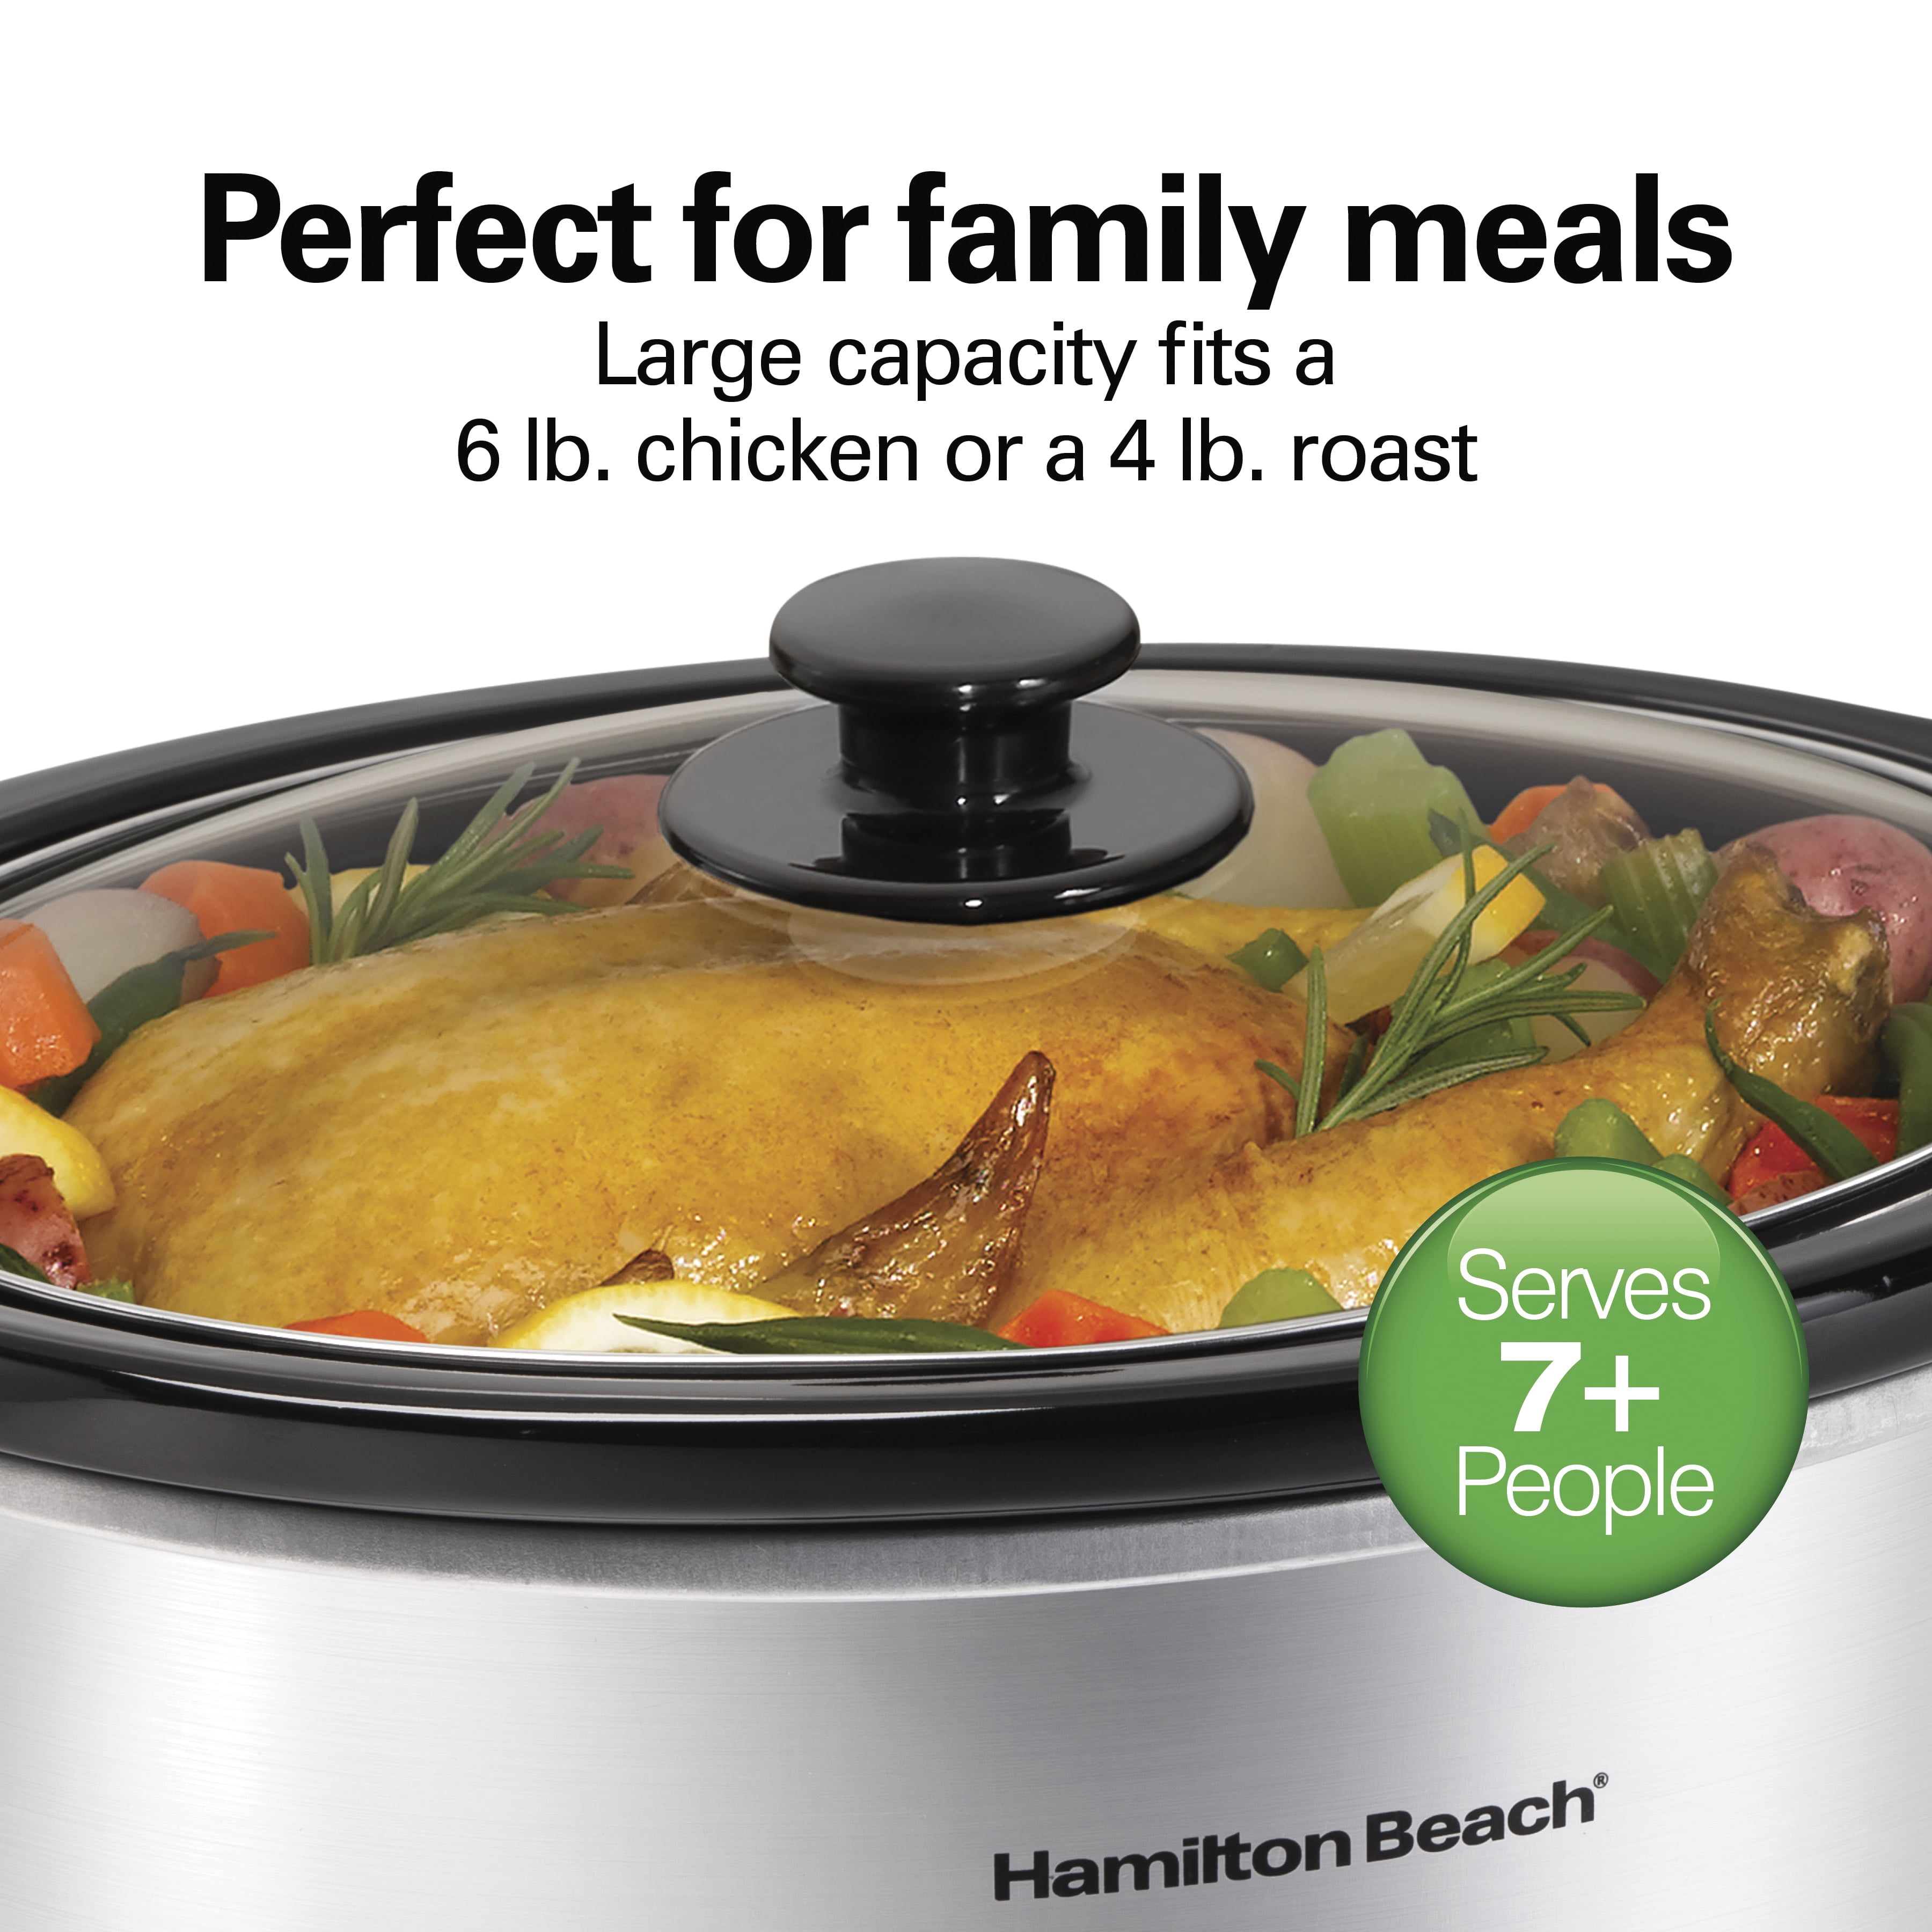 Hamilton Beach Slow Cookers at